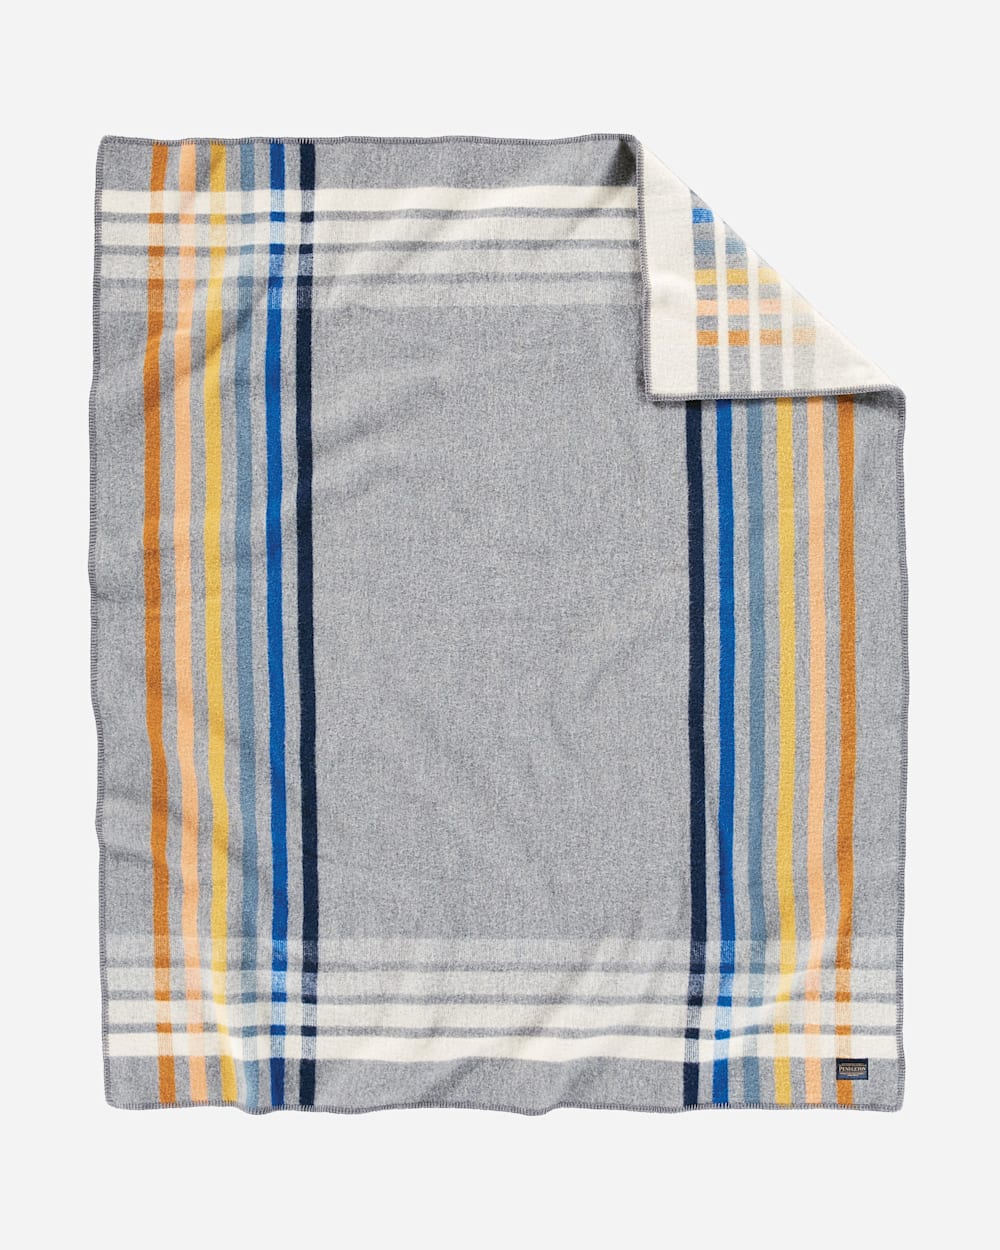 ADDITIONAL VIEW OF OSLO EVENING THROW IN GREY MULTI PLAID image number 2